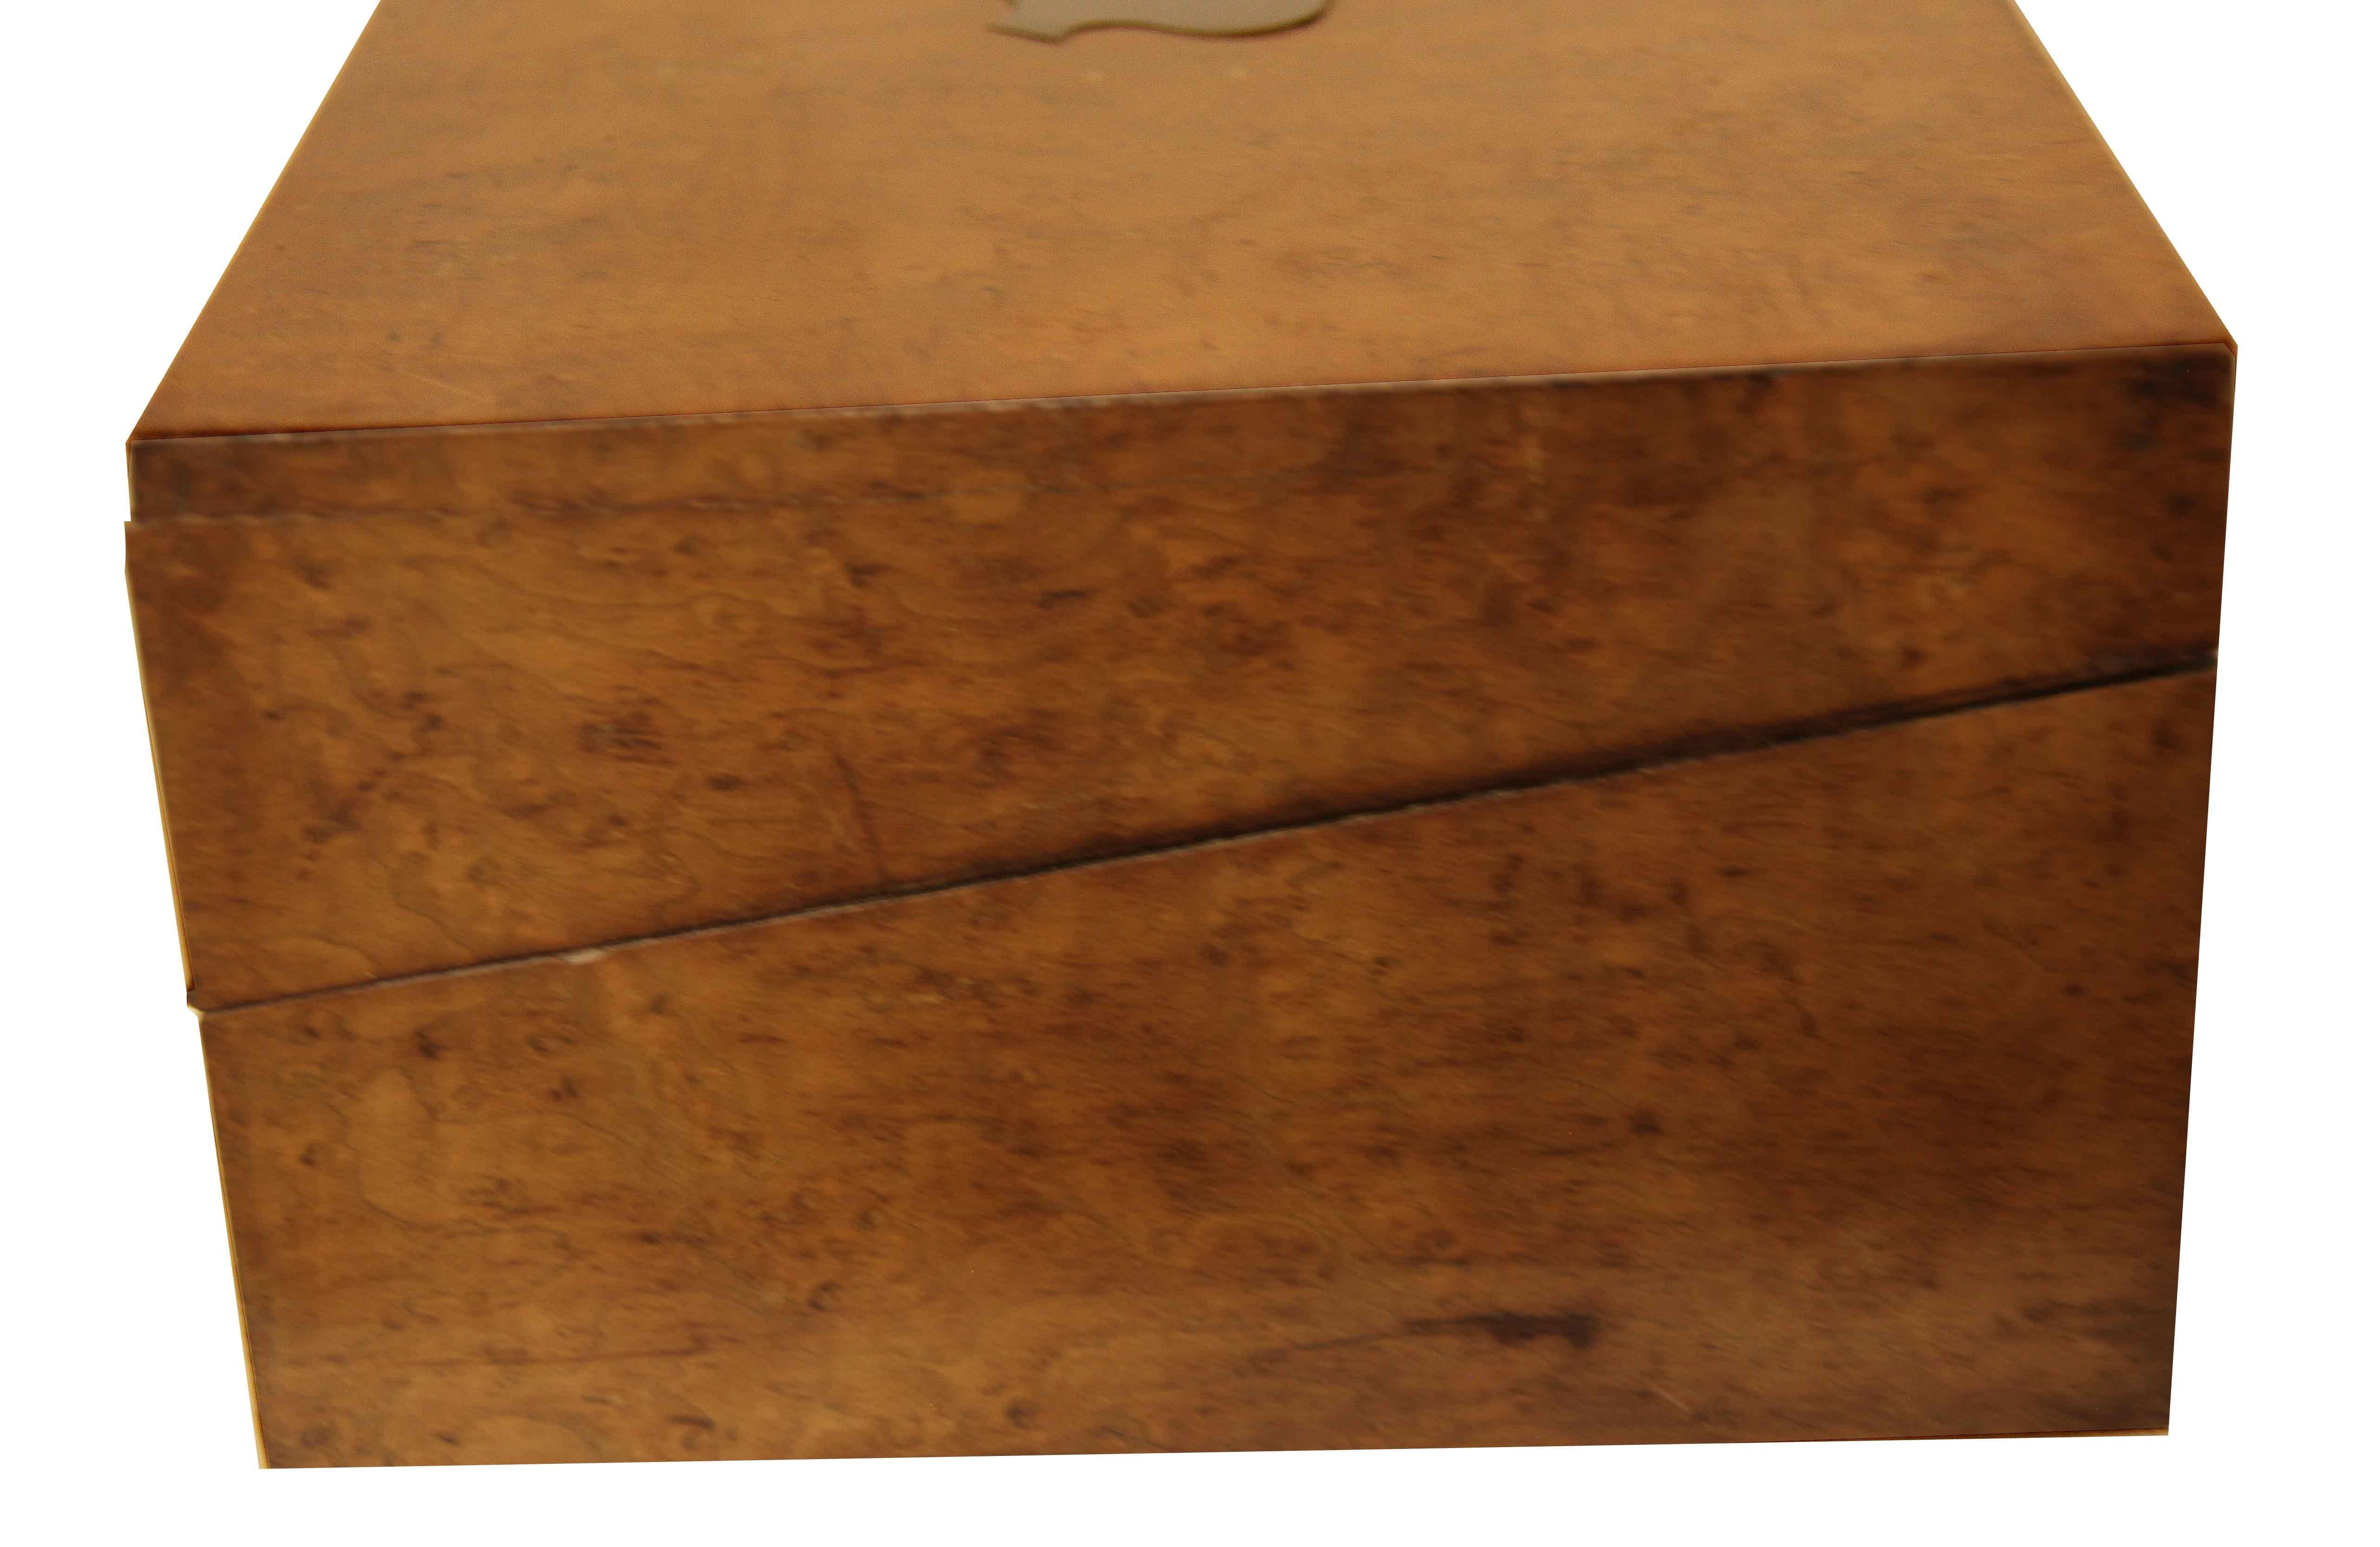 English bird's eye maple lap desk , the entire desk with beautiful color and patina, the top has a shield medallion in the center; the front key hole is inlaid with an interesting diamond shape of beech and ebony; interior with original blue felt